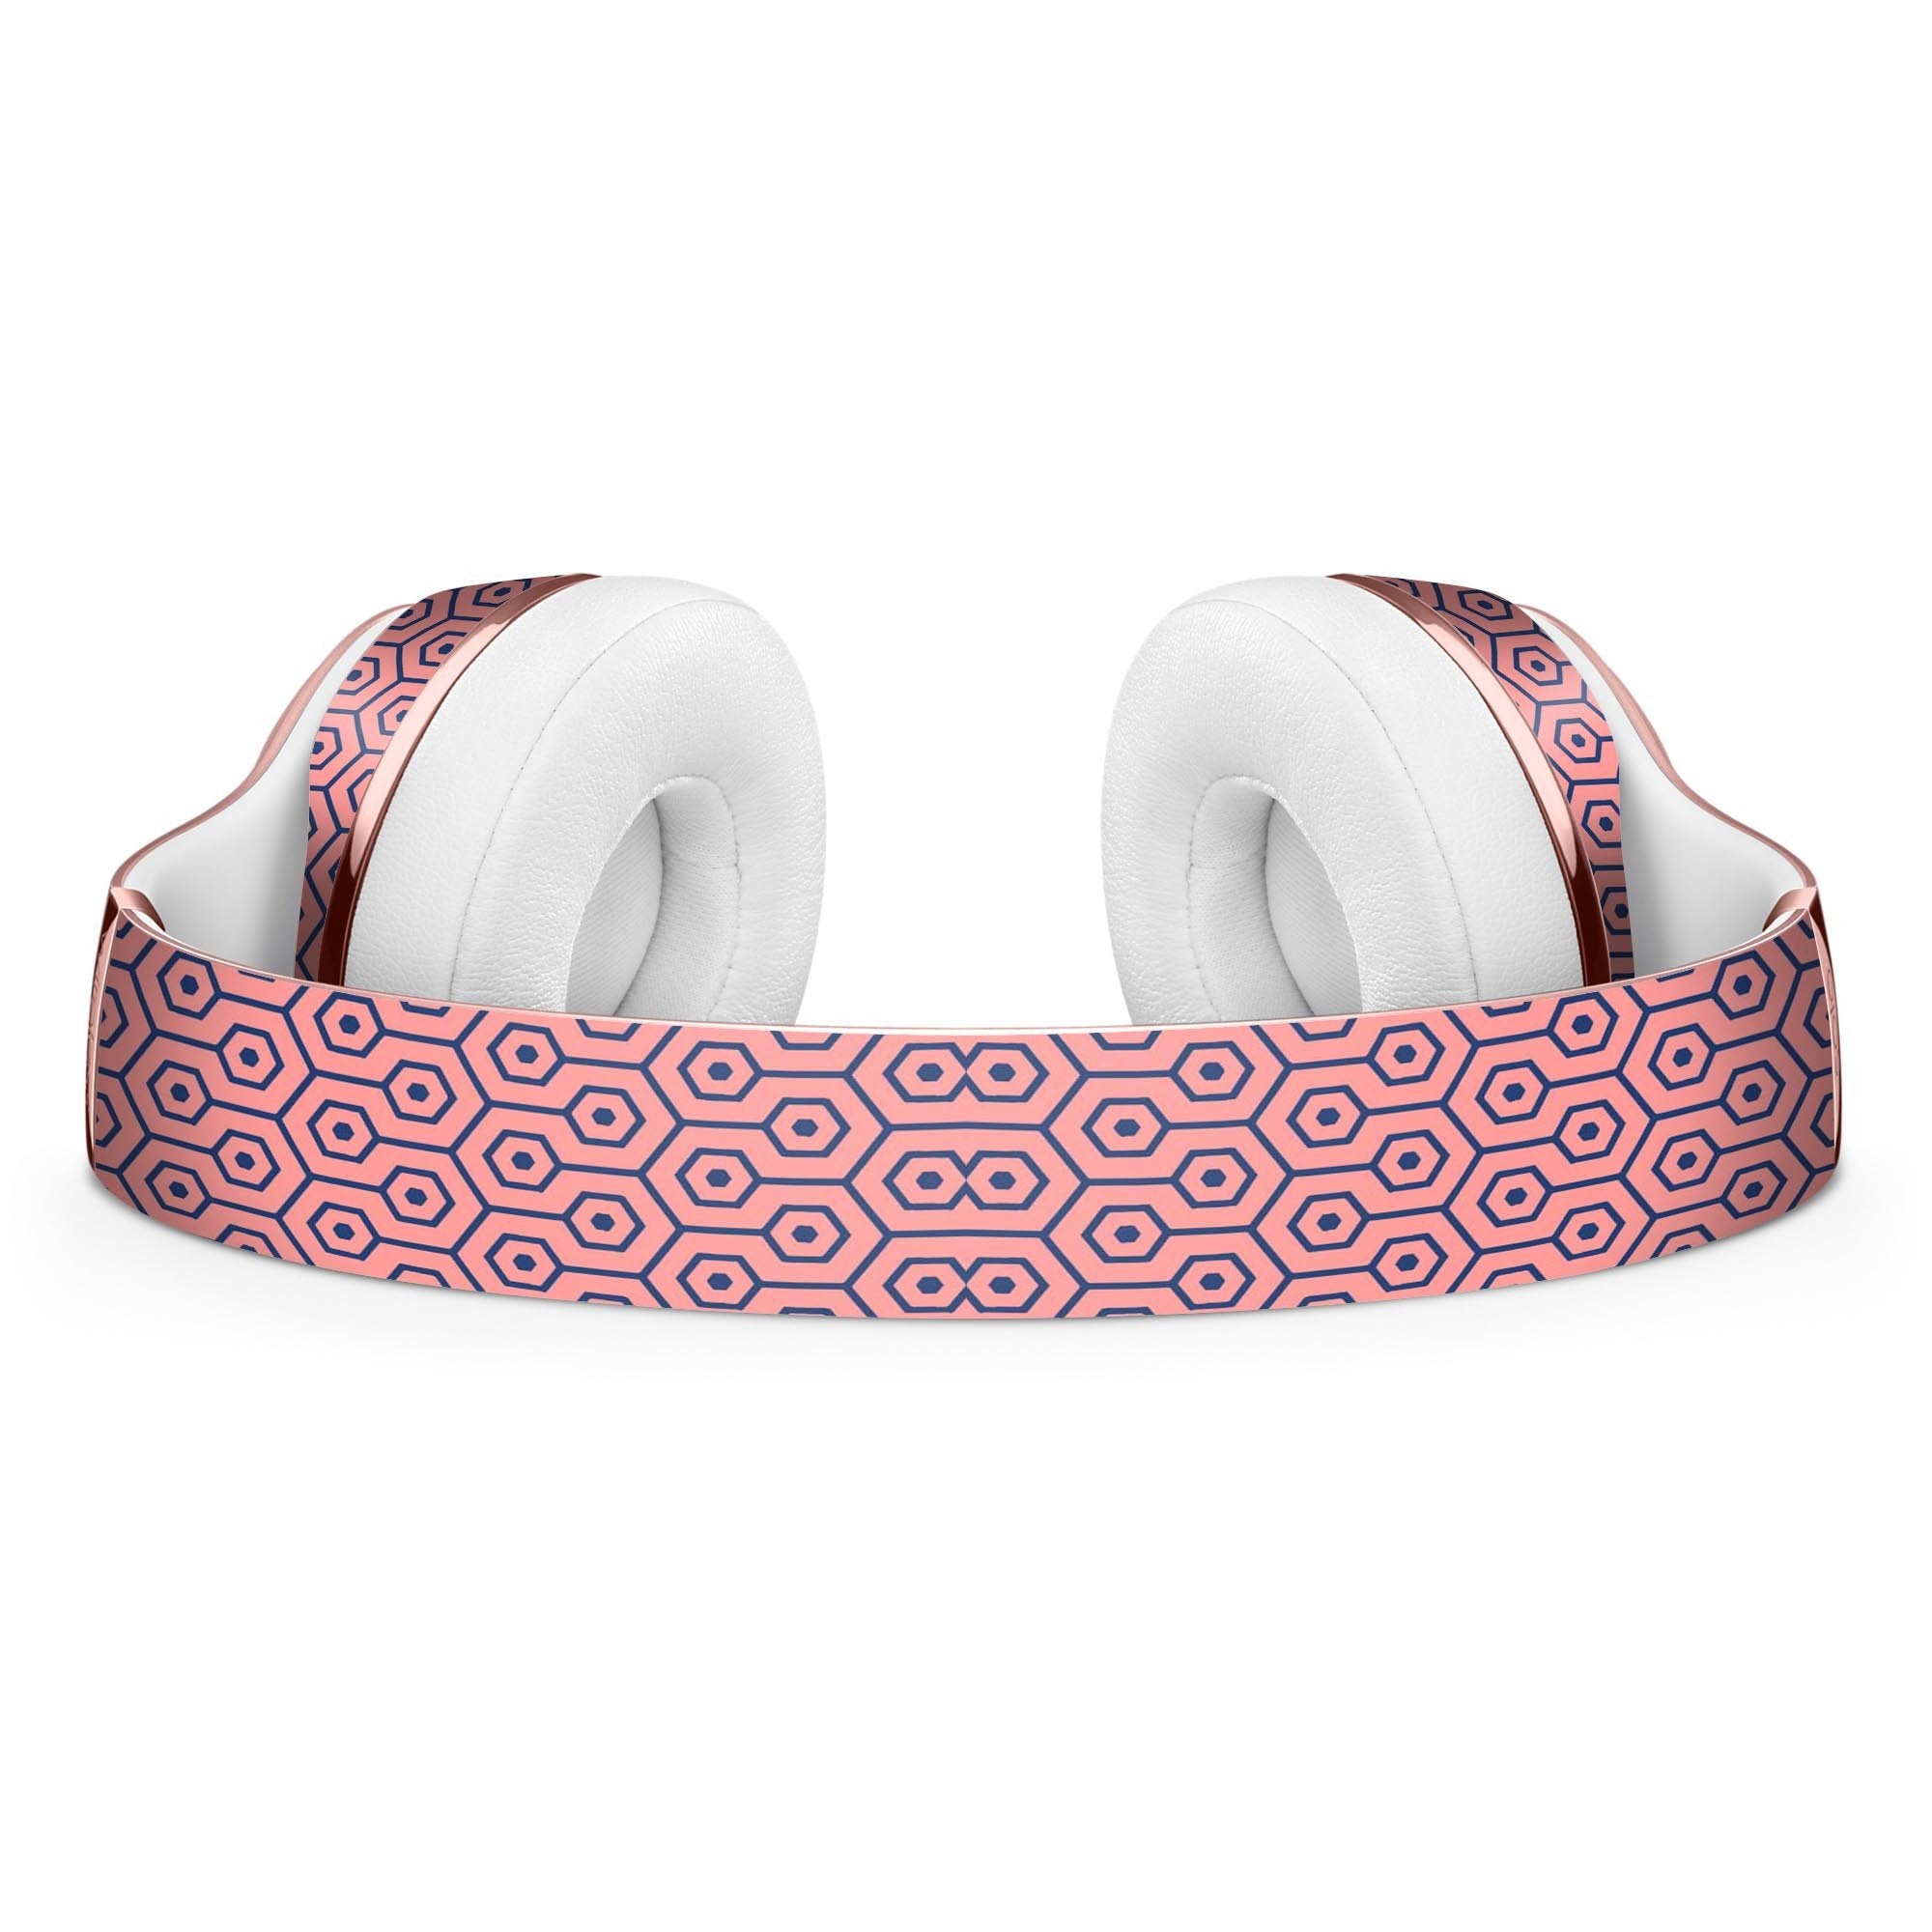 Navy Cells Over Coral 2 Full-Body Skin Kit for the Beats by Dre Solo